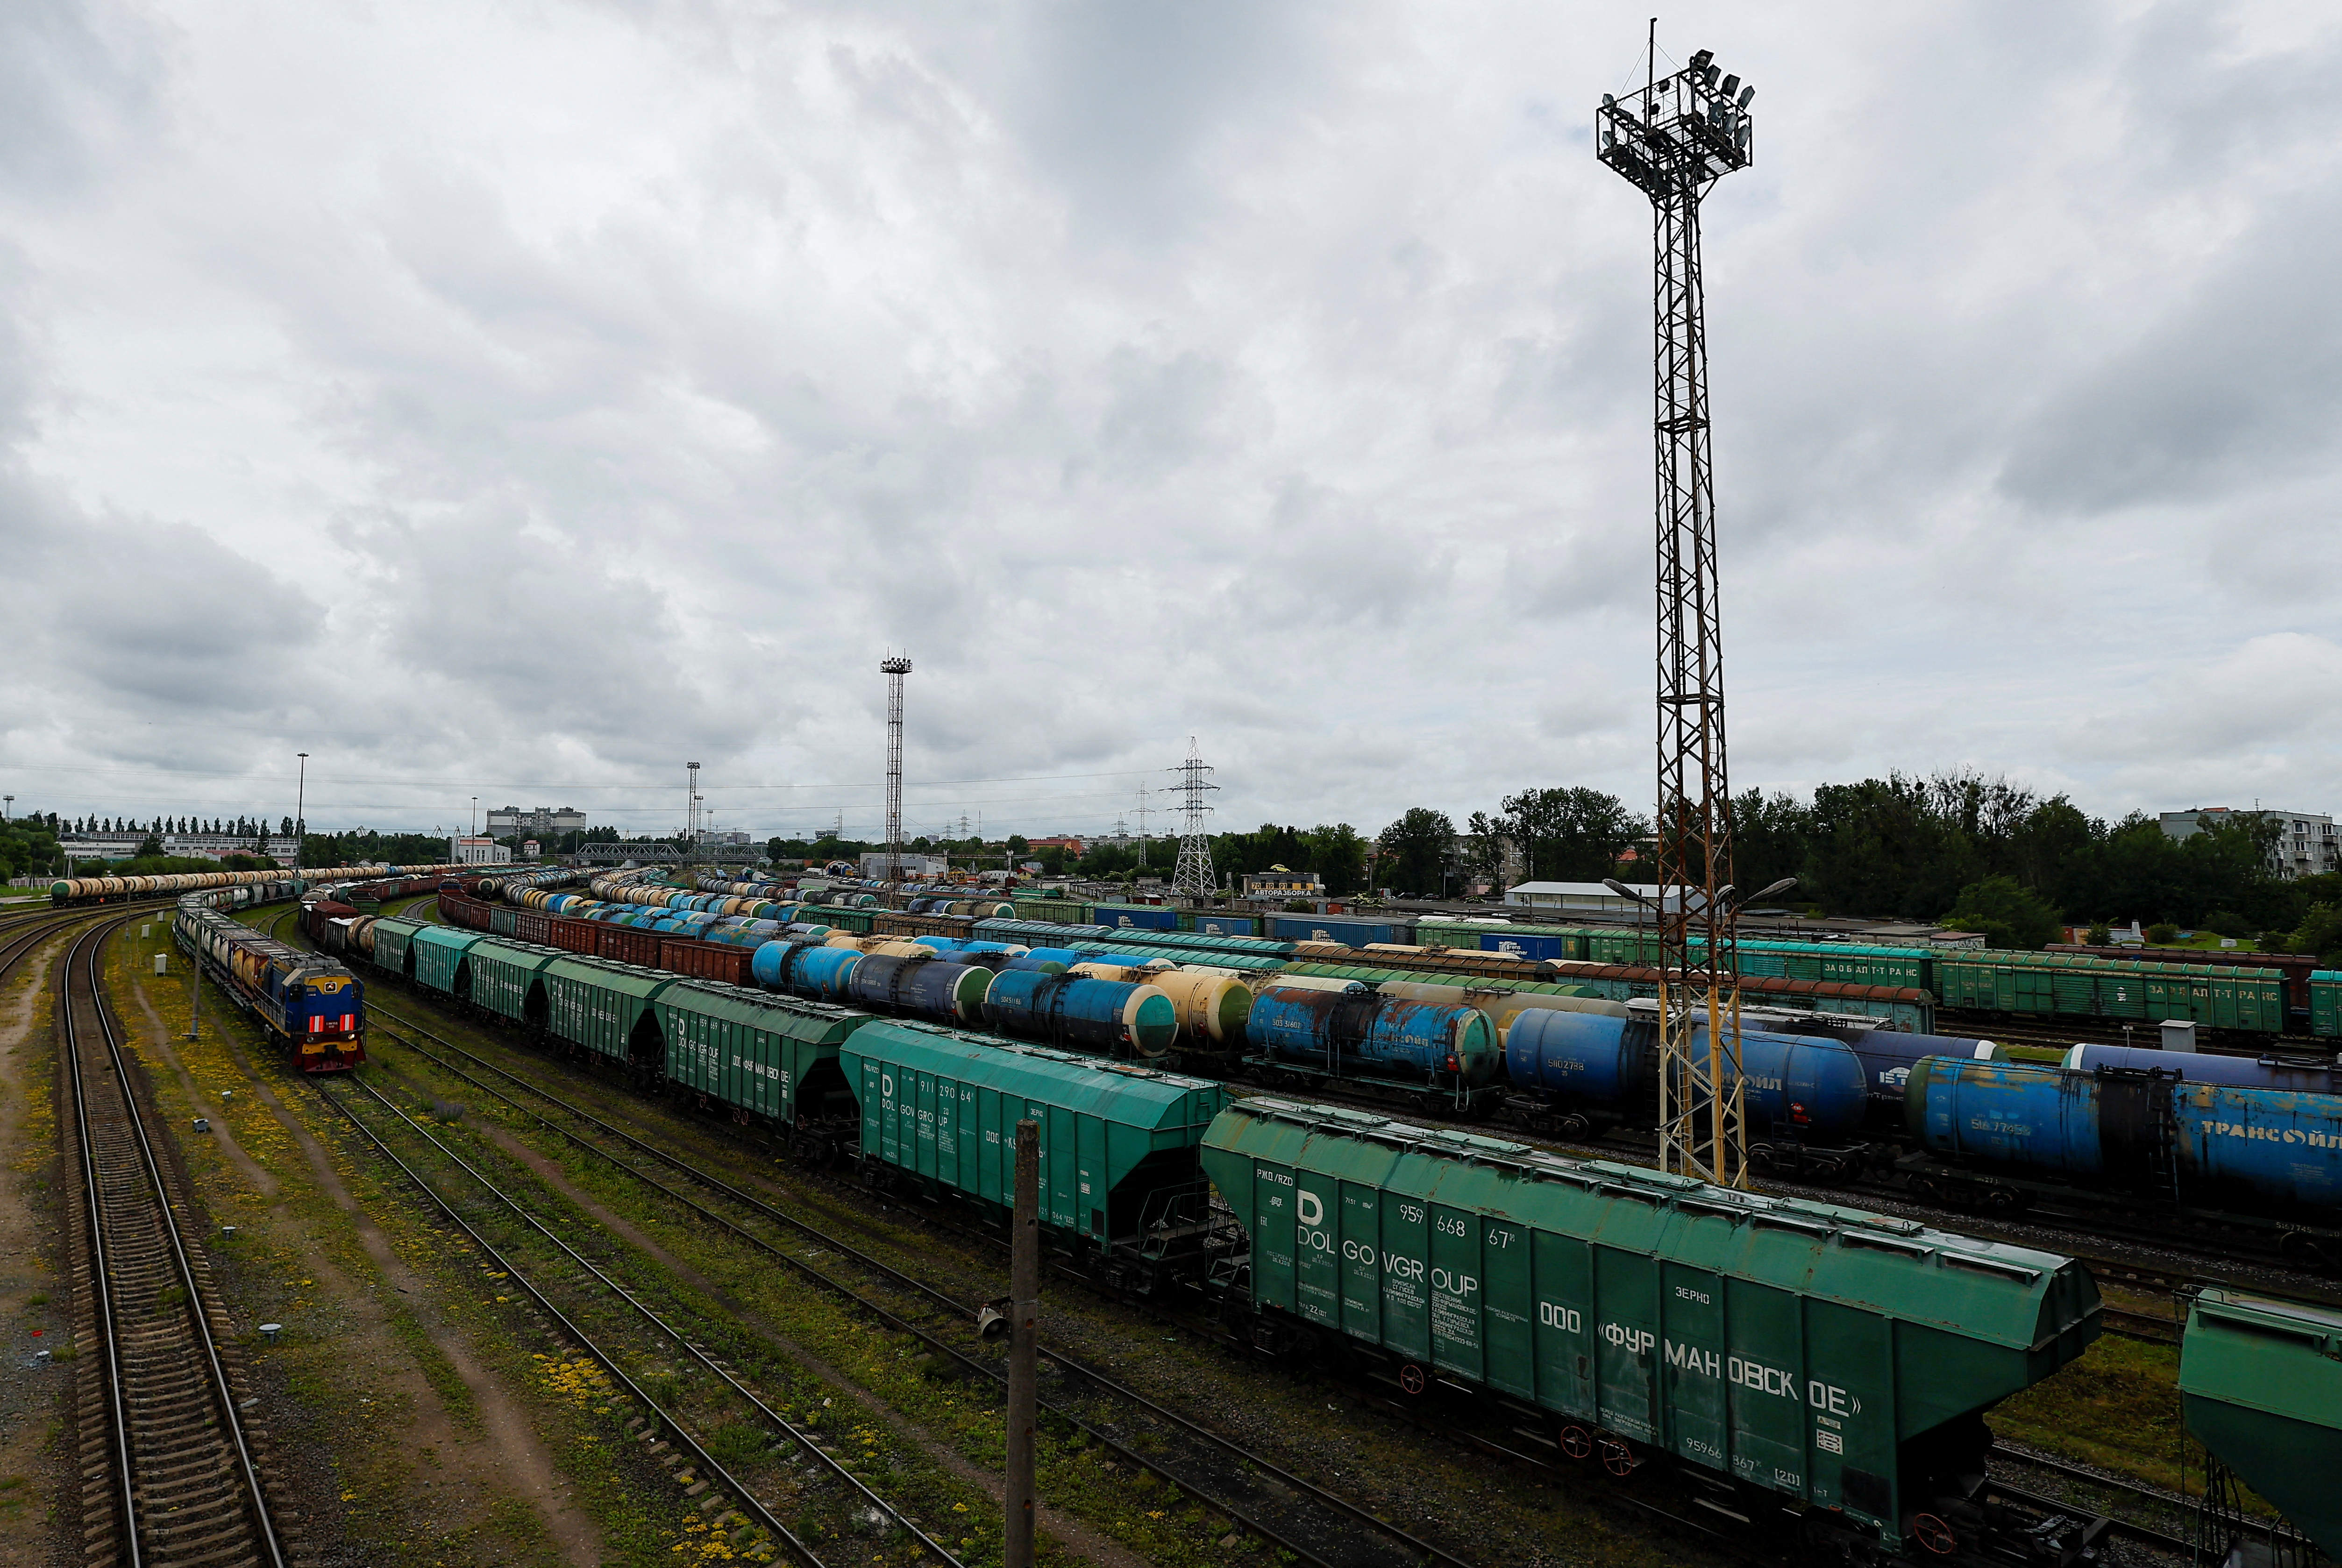 A view shows railway cars in Kaliningrad